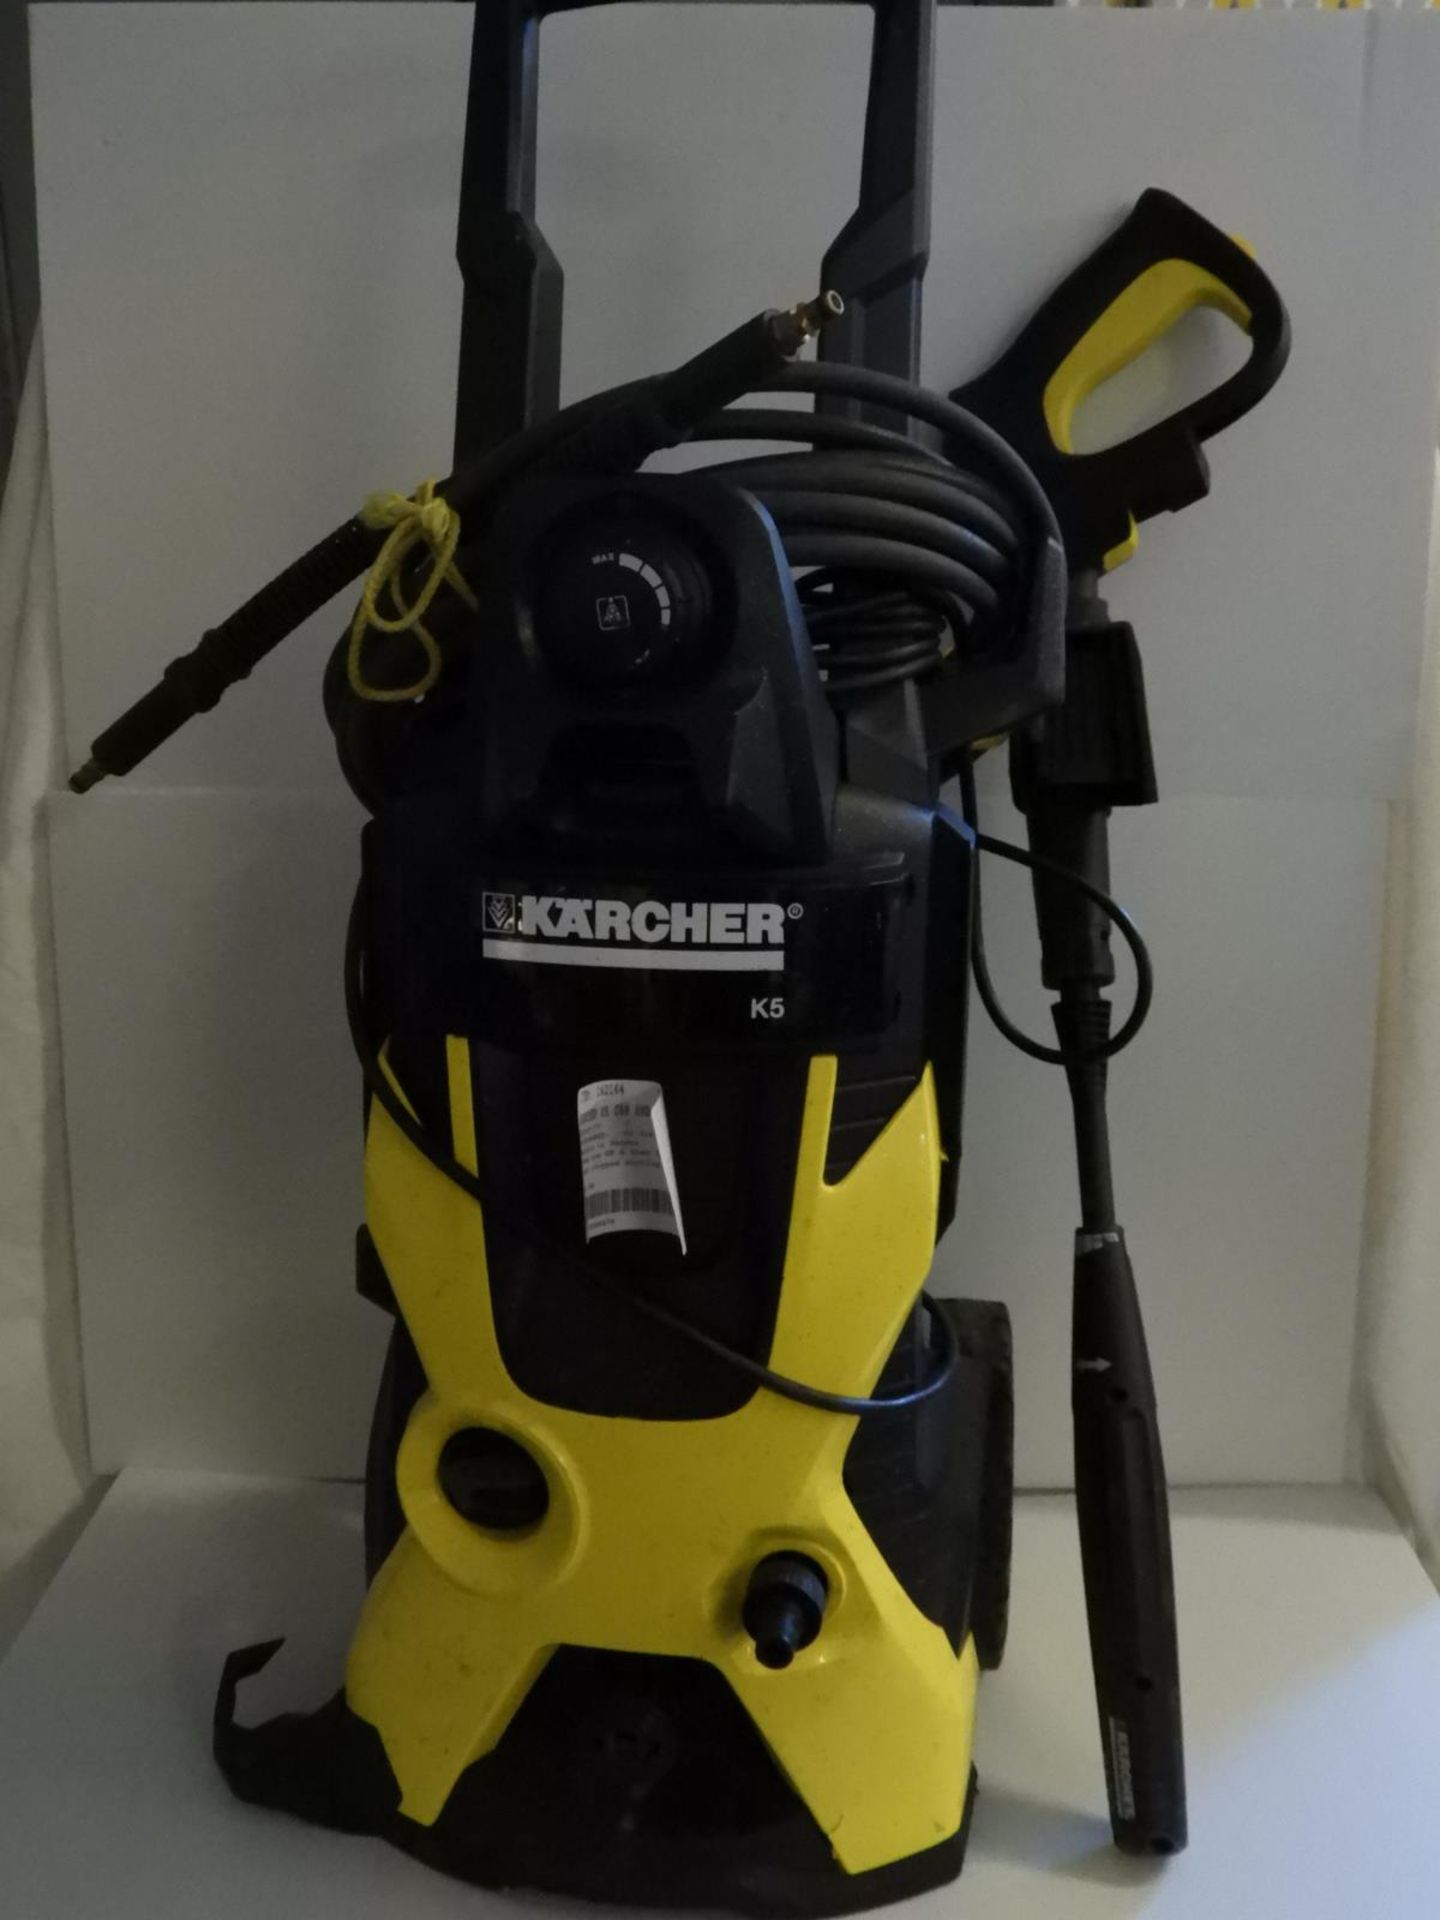 *Karcher K5 Car and Home Cold Water Pressure Washer